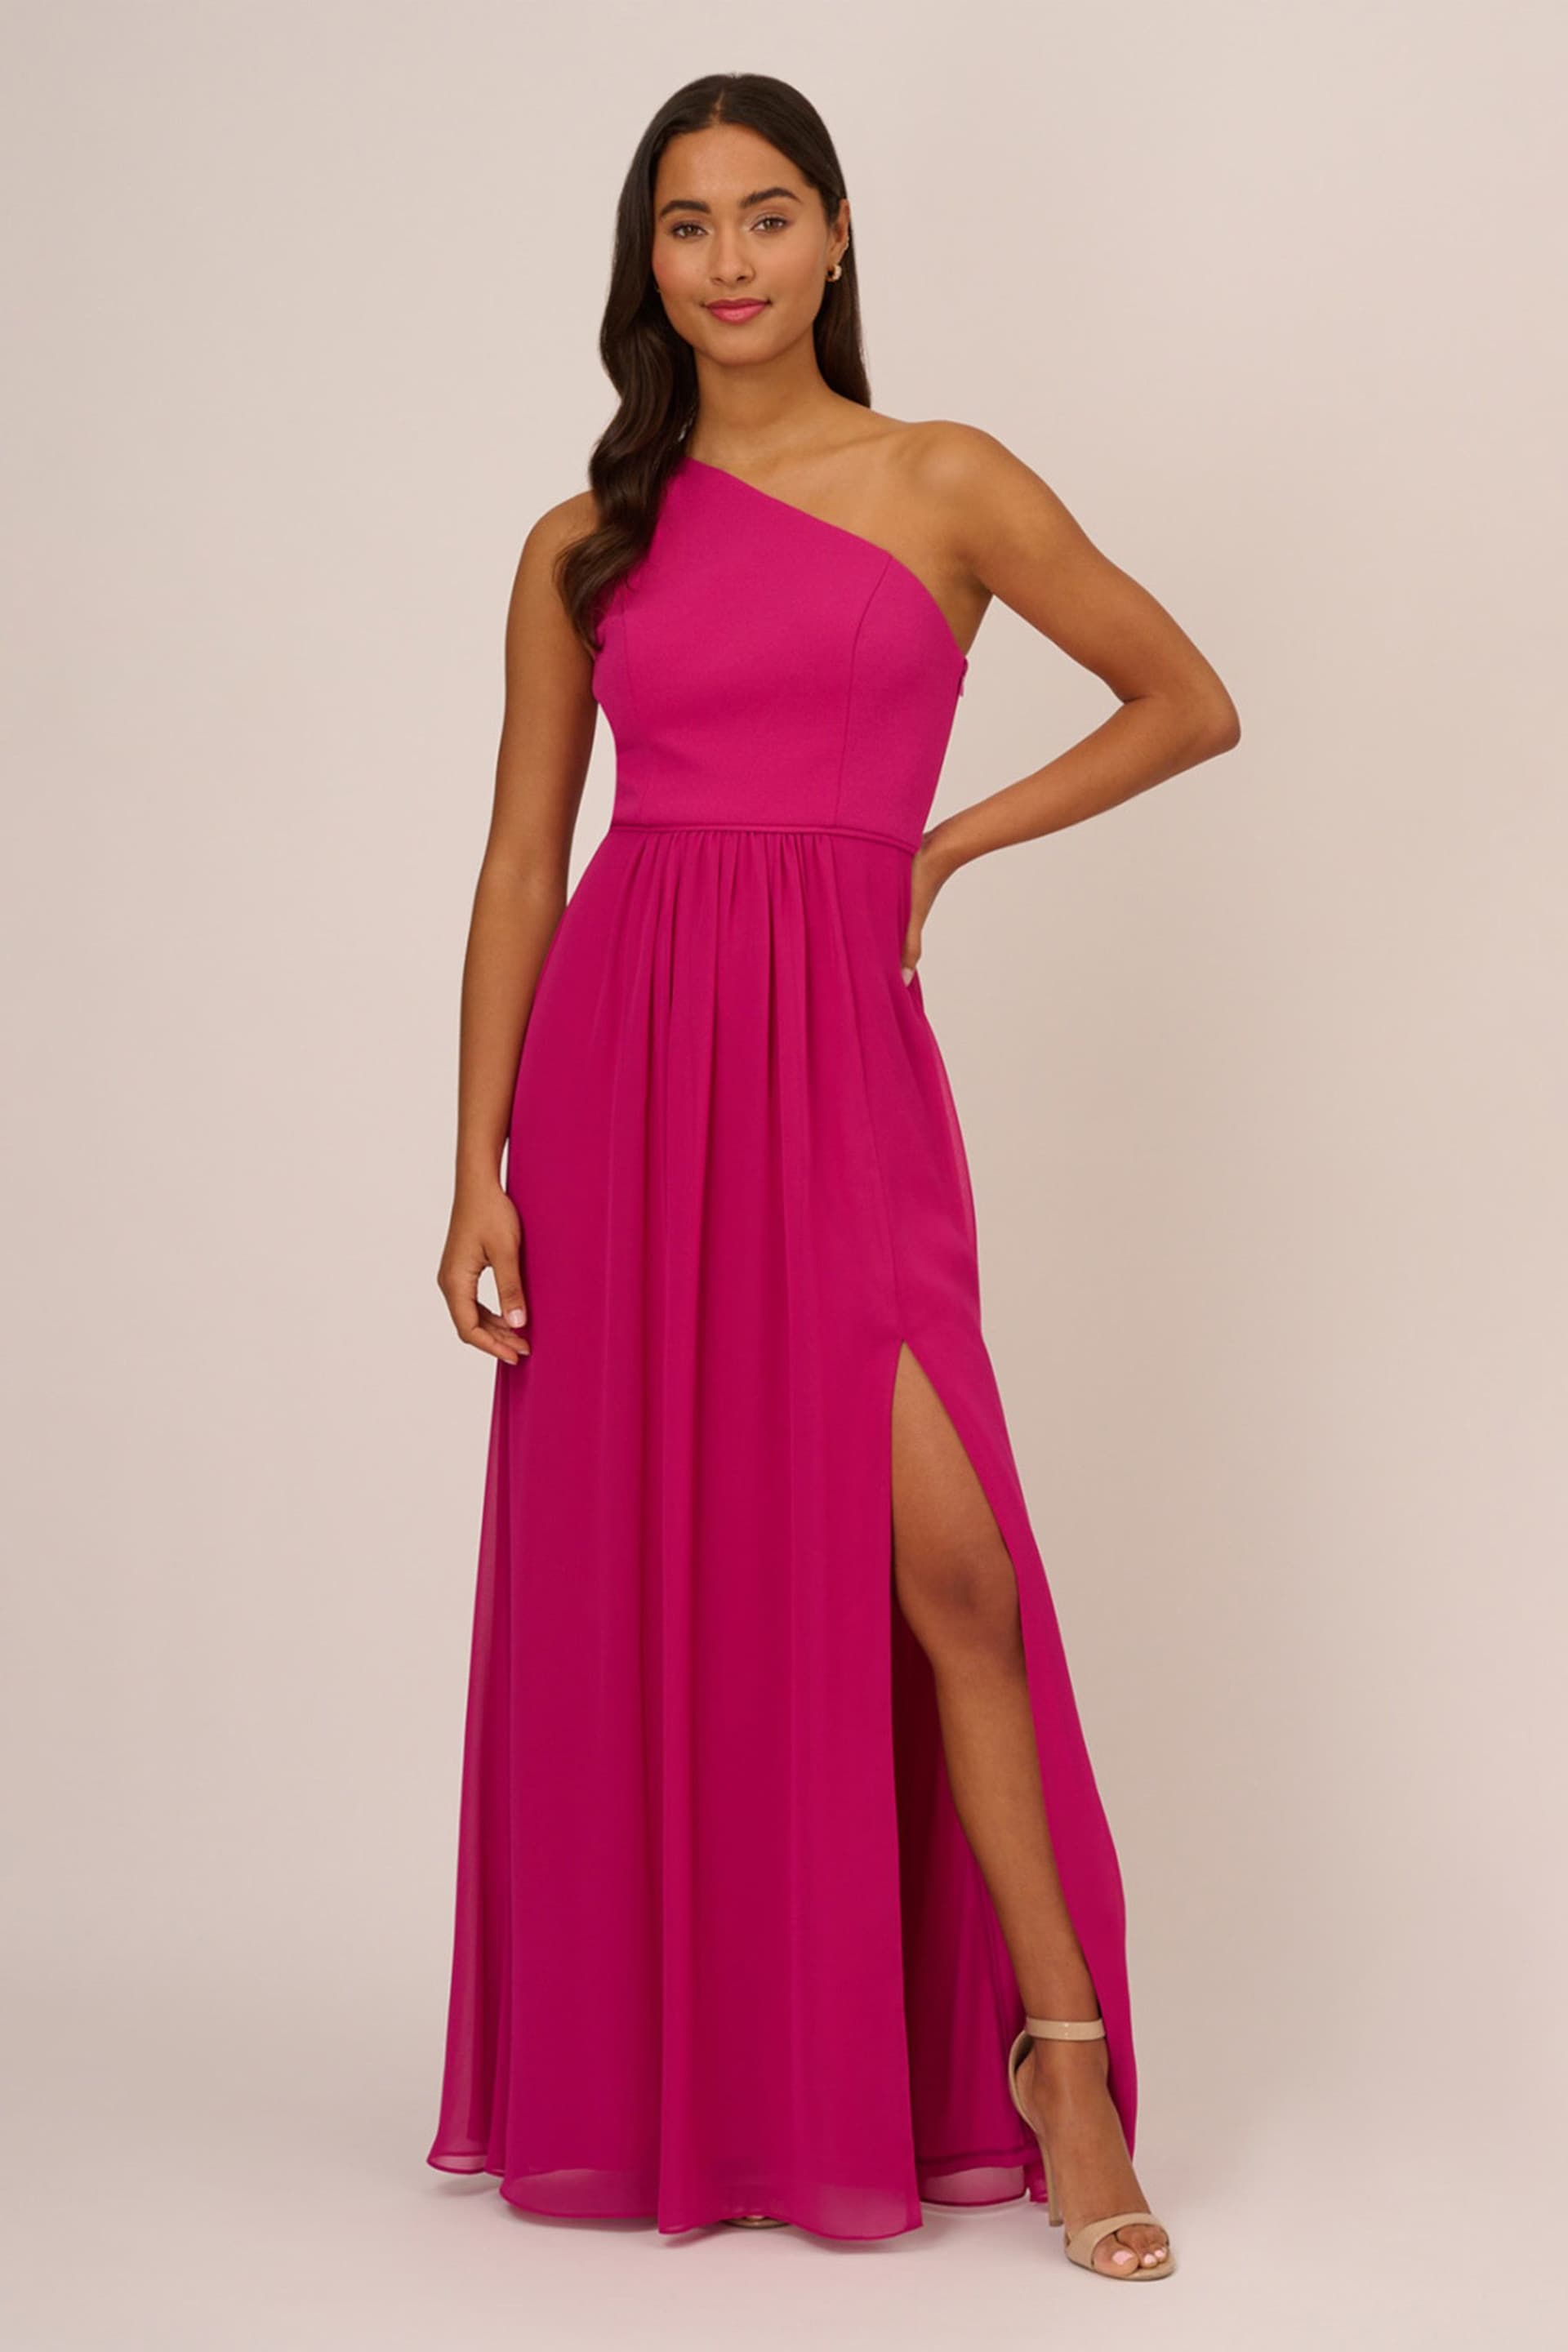 Adrianna Papell One Shoulder Chiffon Gown - Image 1 of 7